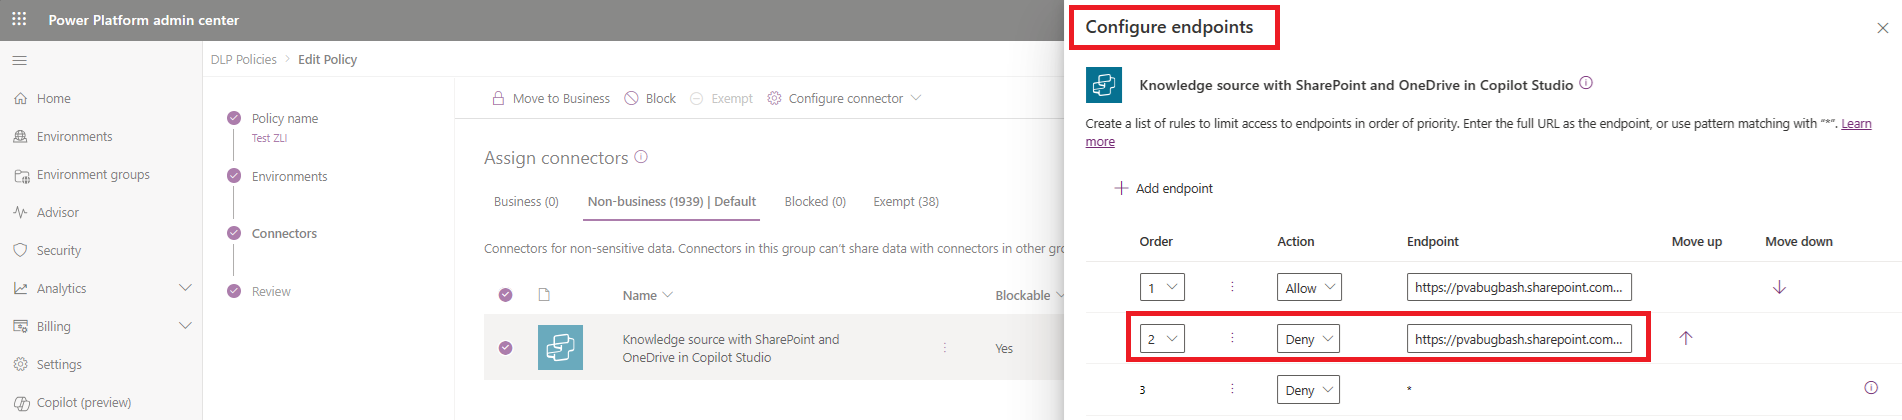 Screenshot of configuring endpoint in DLP policy.